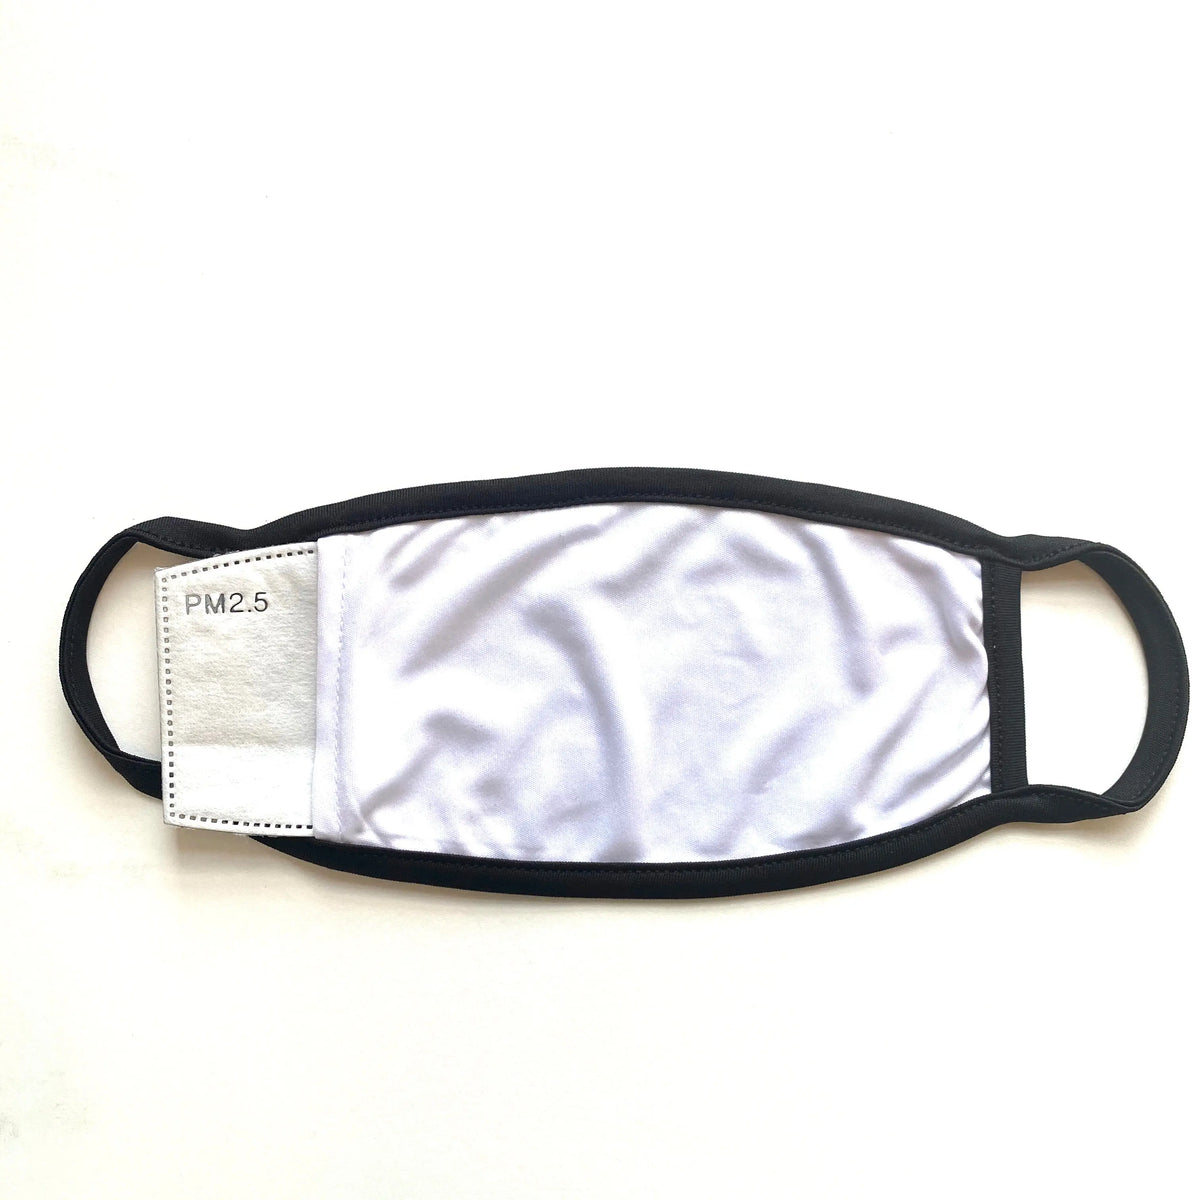 Filter Face Mask INPAT (includes 5 PM2.5 filters)